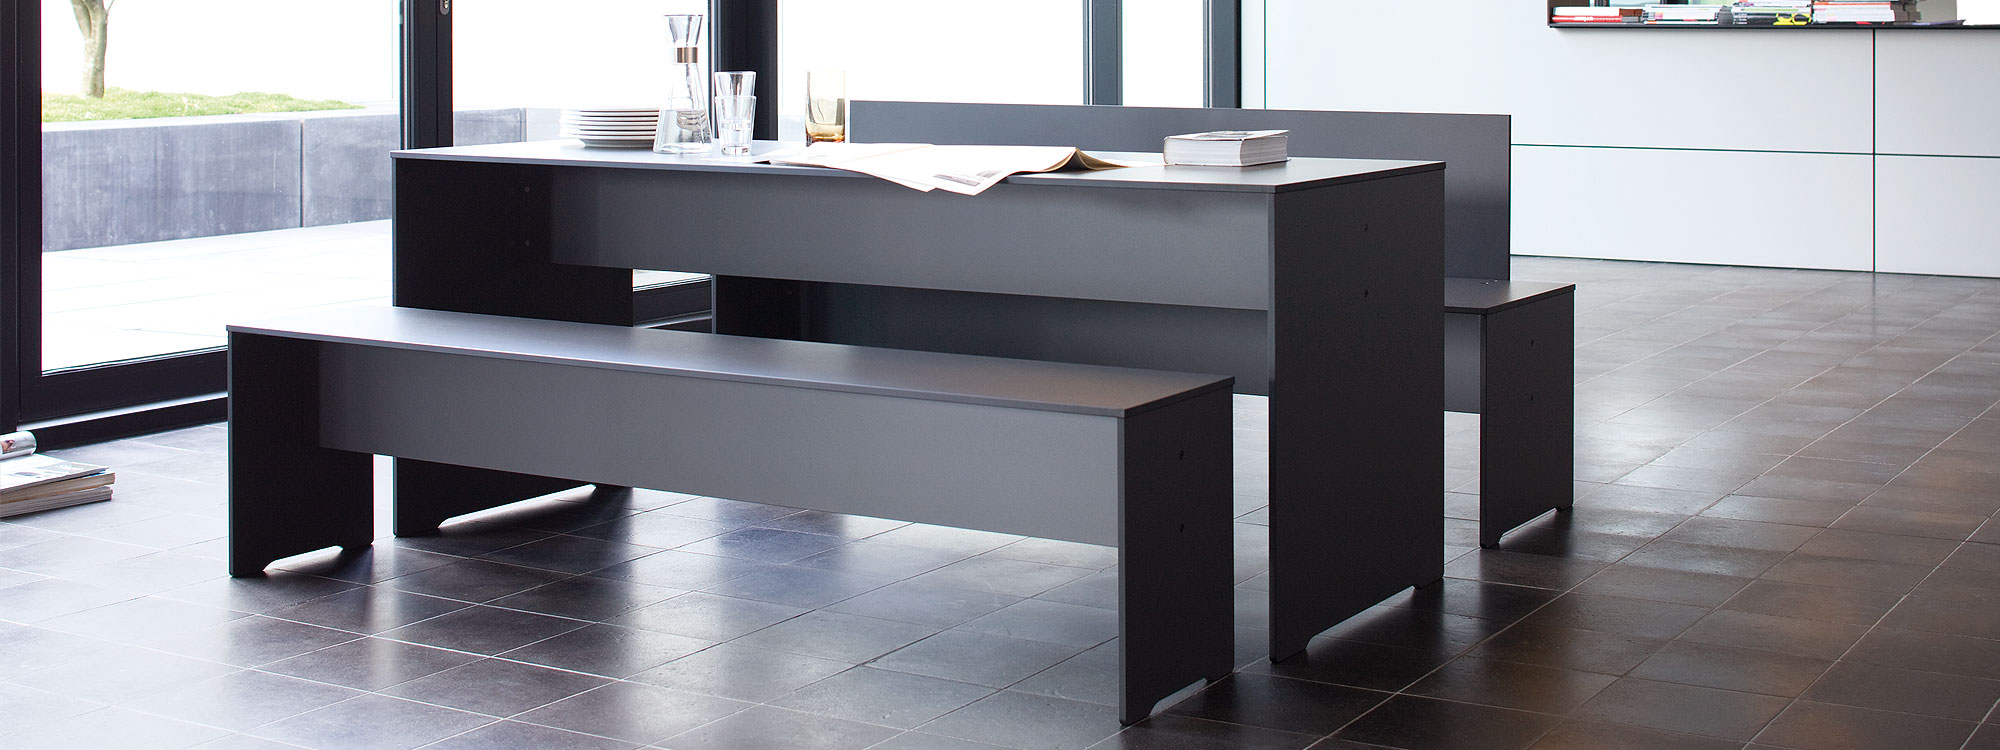 Image of dark grey RIVA table and bench set by Conmoto which can be used anywhere in the garden or inside the home